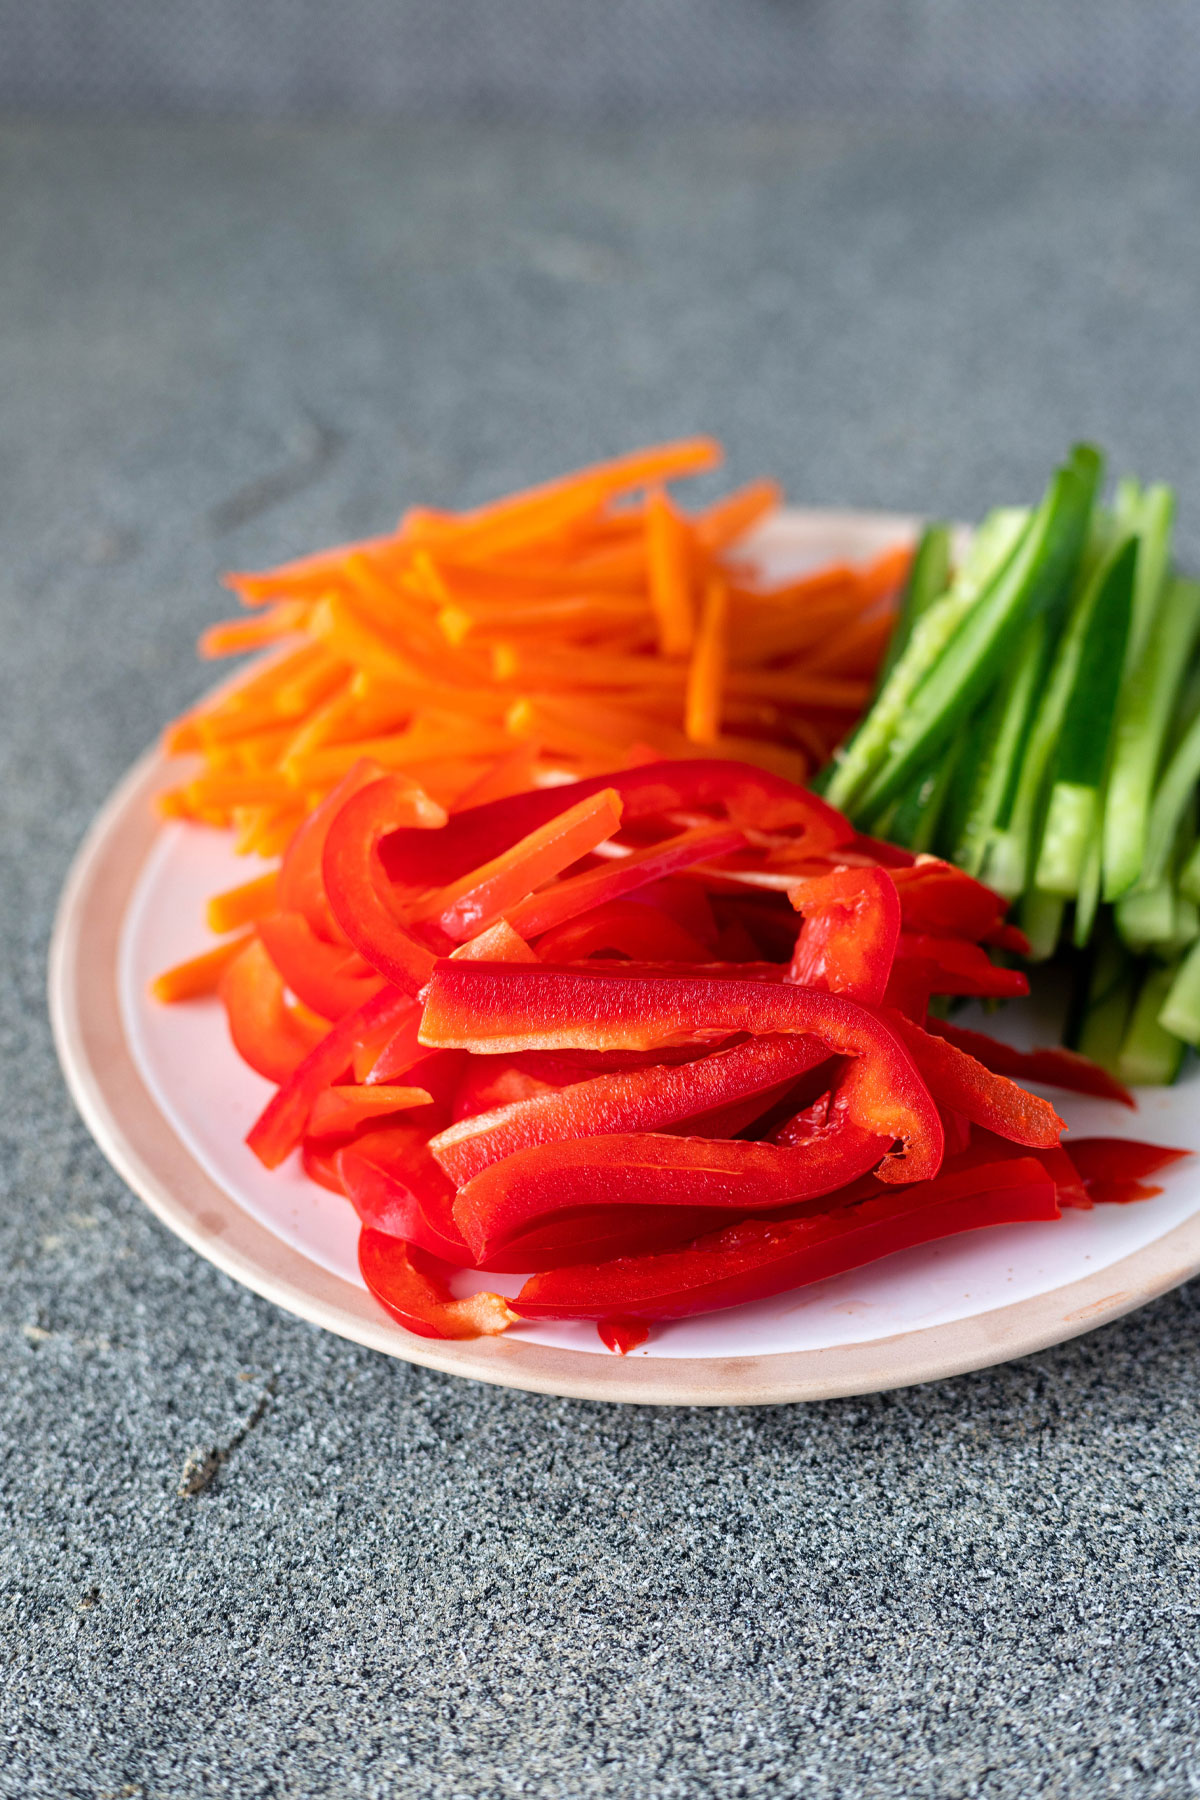 red pepper, carrot and cucumber cut on a small white plate